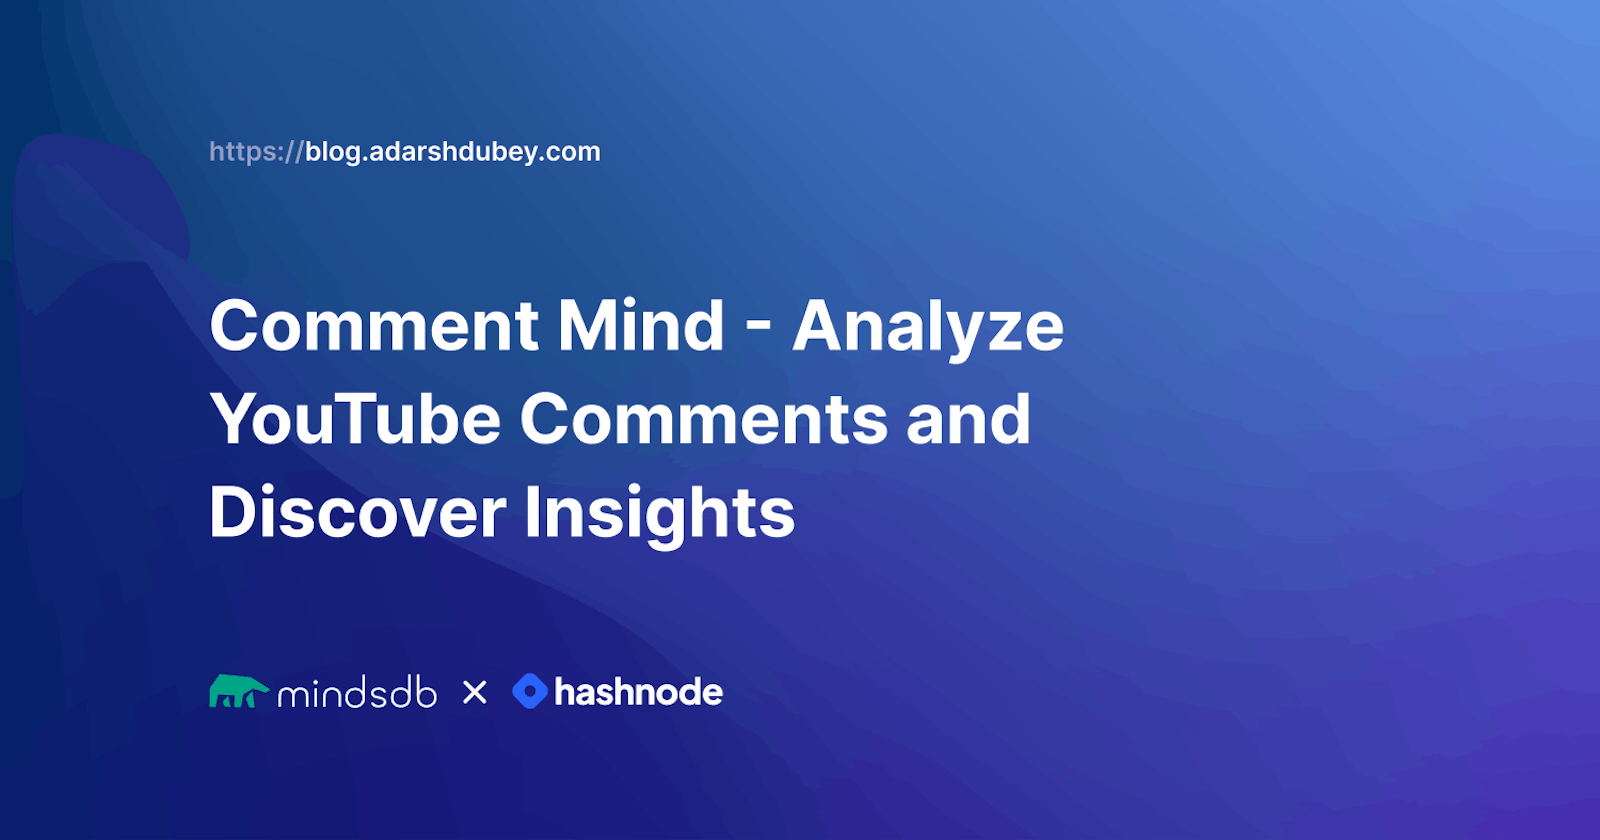 Comment Mind - Analyze YouTube Comments and Discover Insights